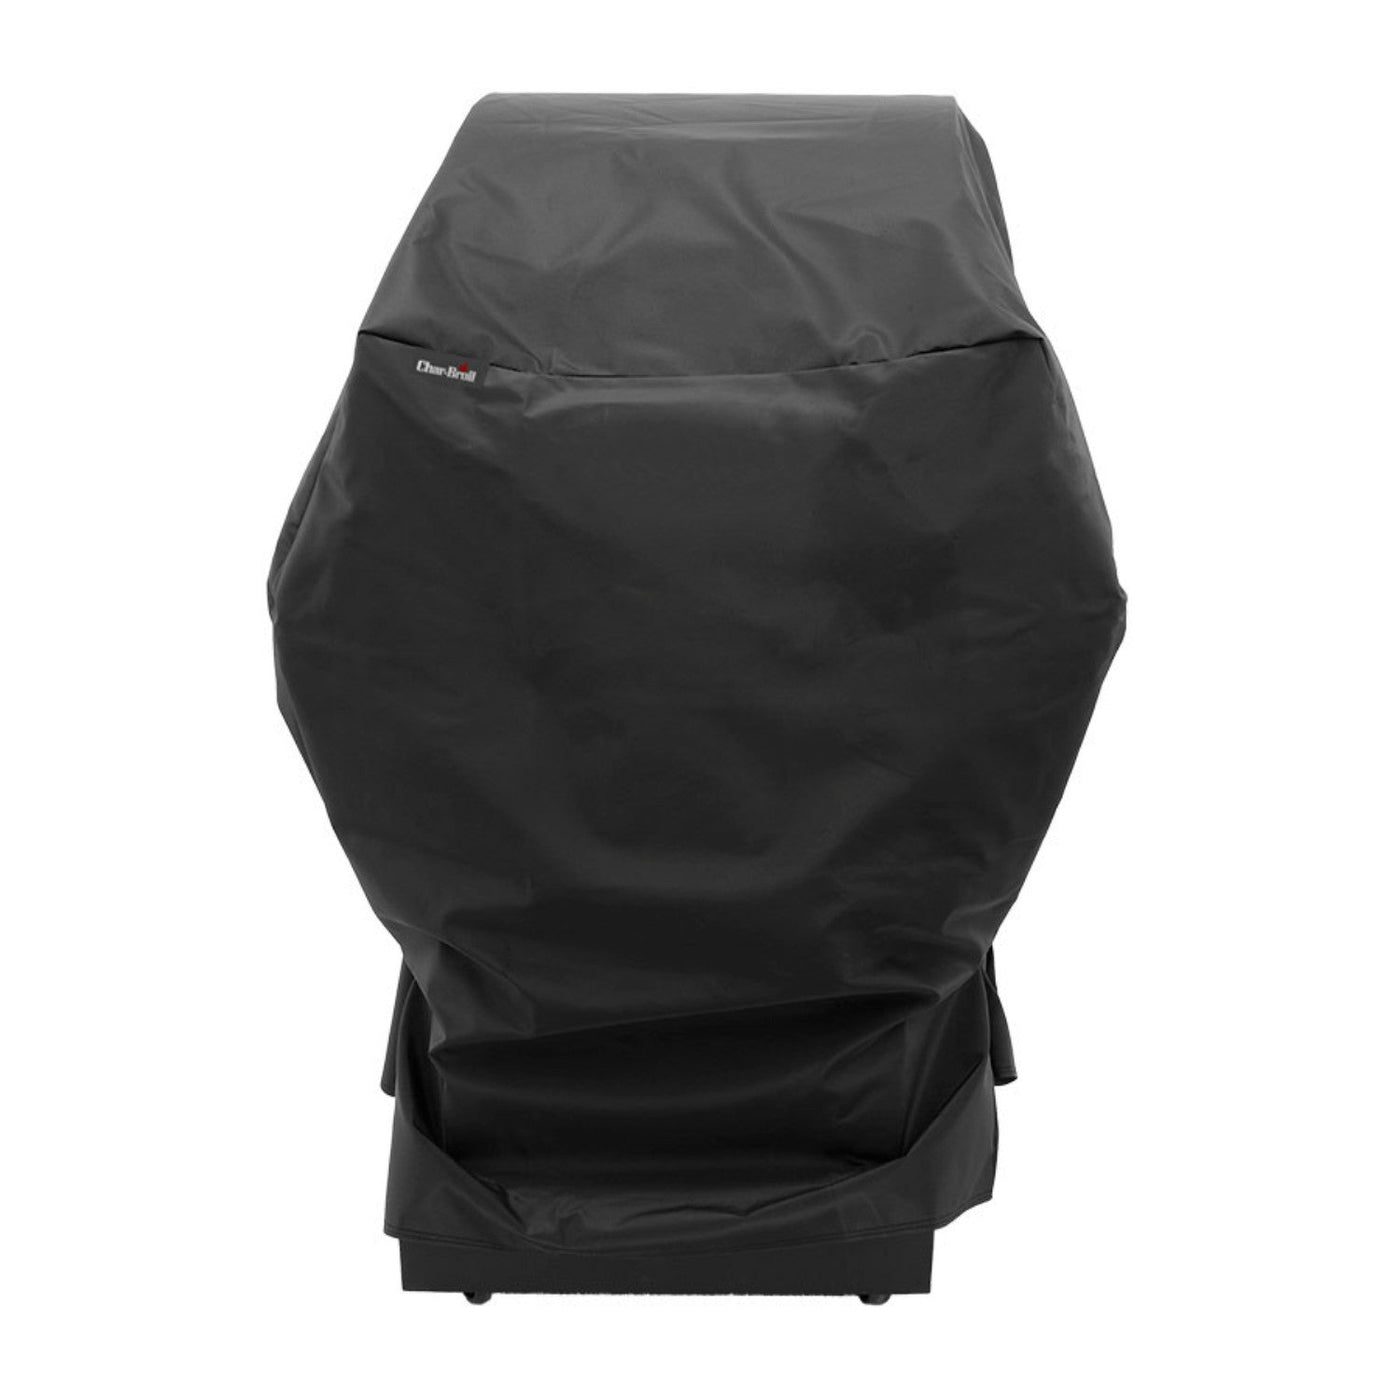 Char-Broil Char-Broil Small Grill and Smoker Performance Grill Cover Camping And Outdoor